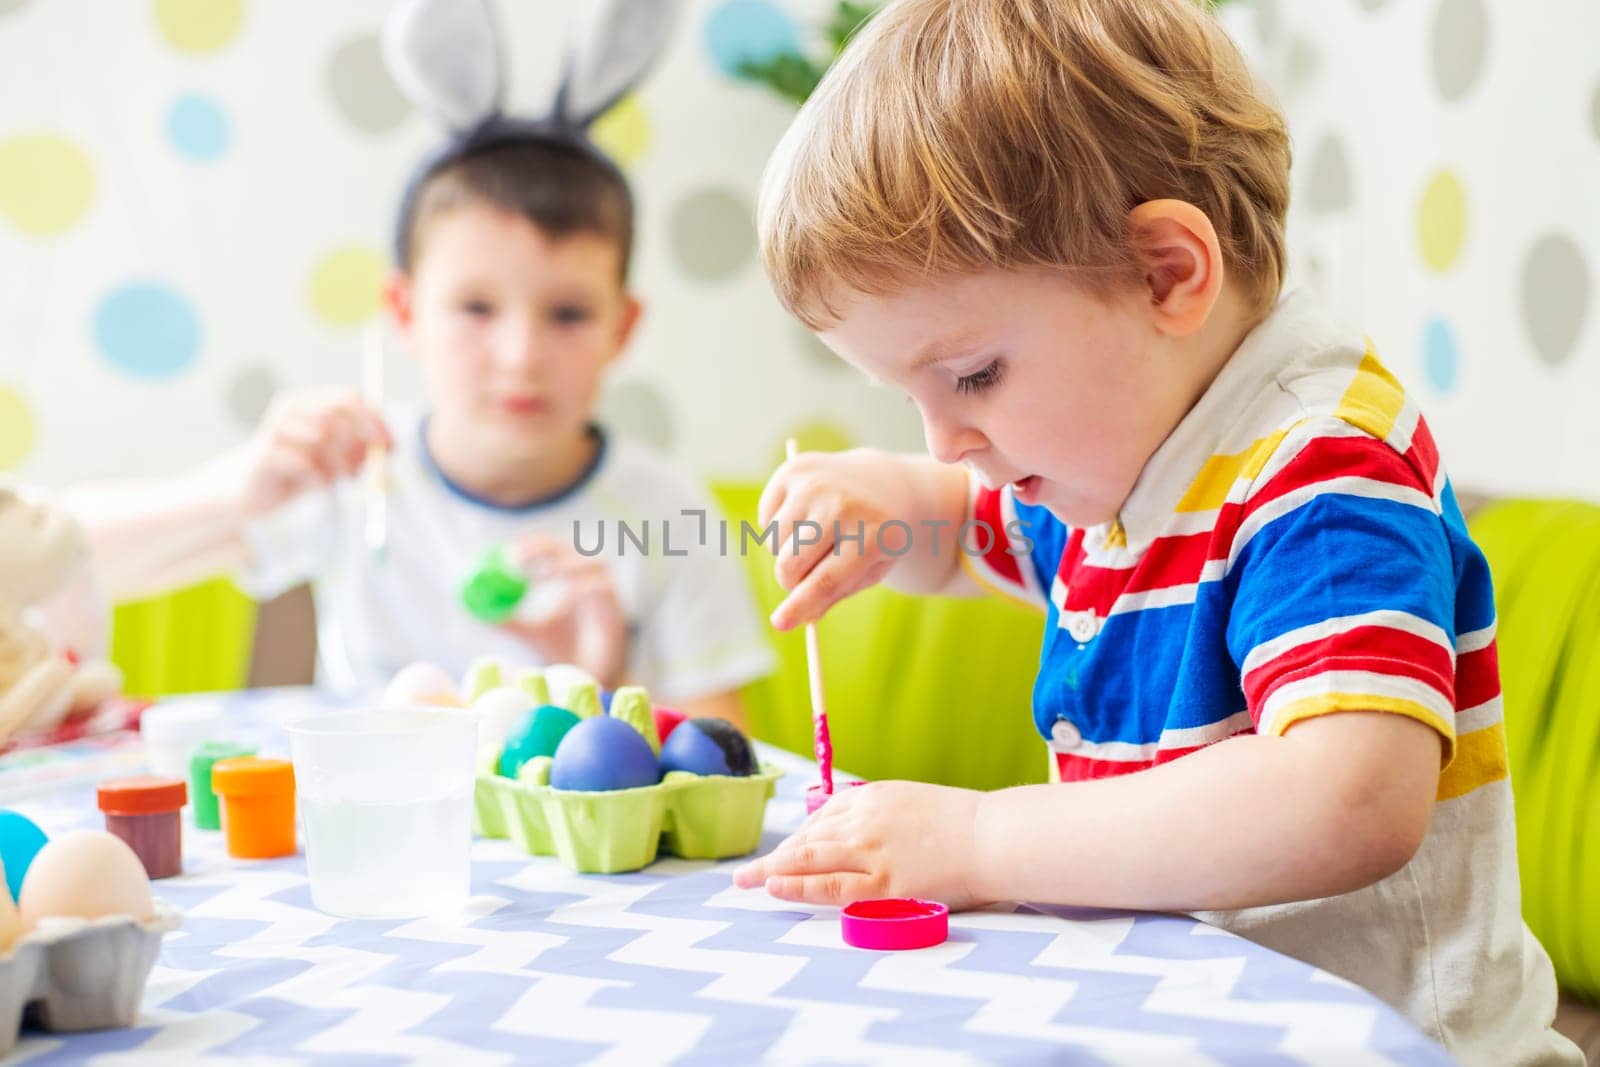 Happy Easter. Children dye colorful egg for Easter hunt by andreyz